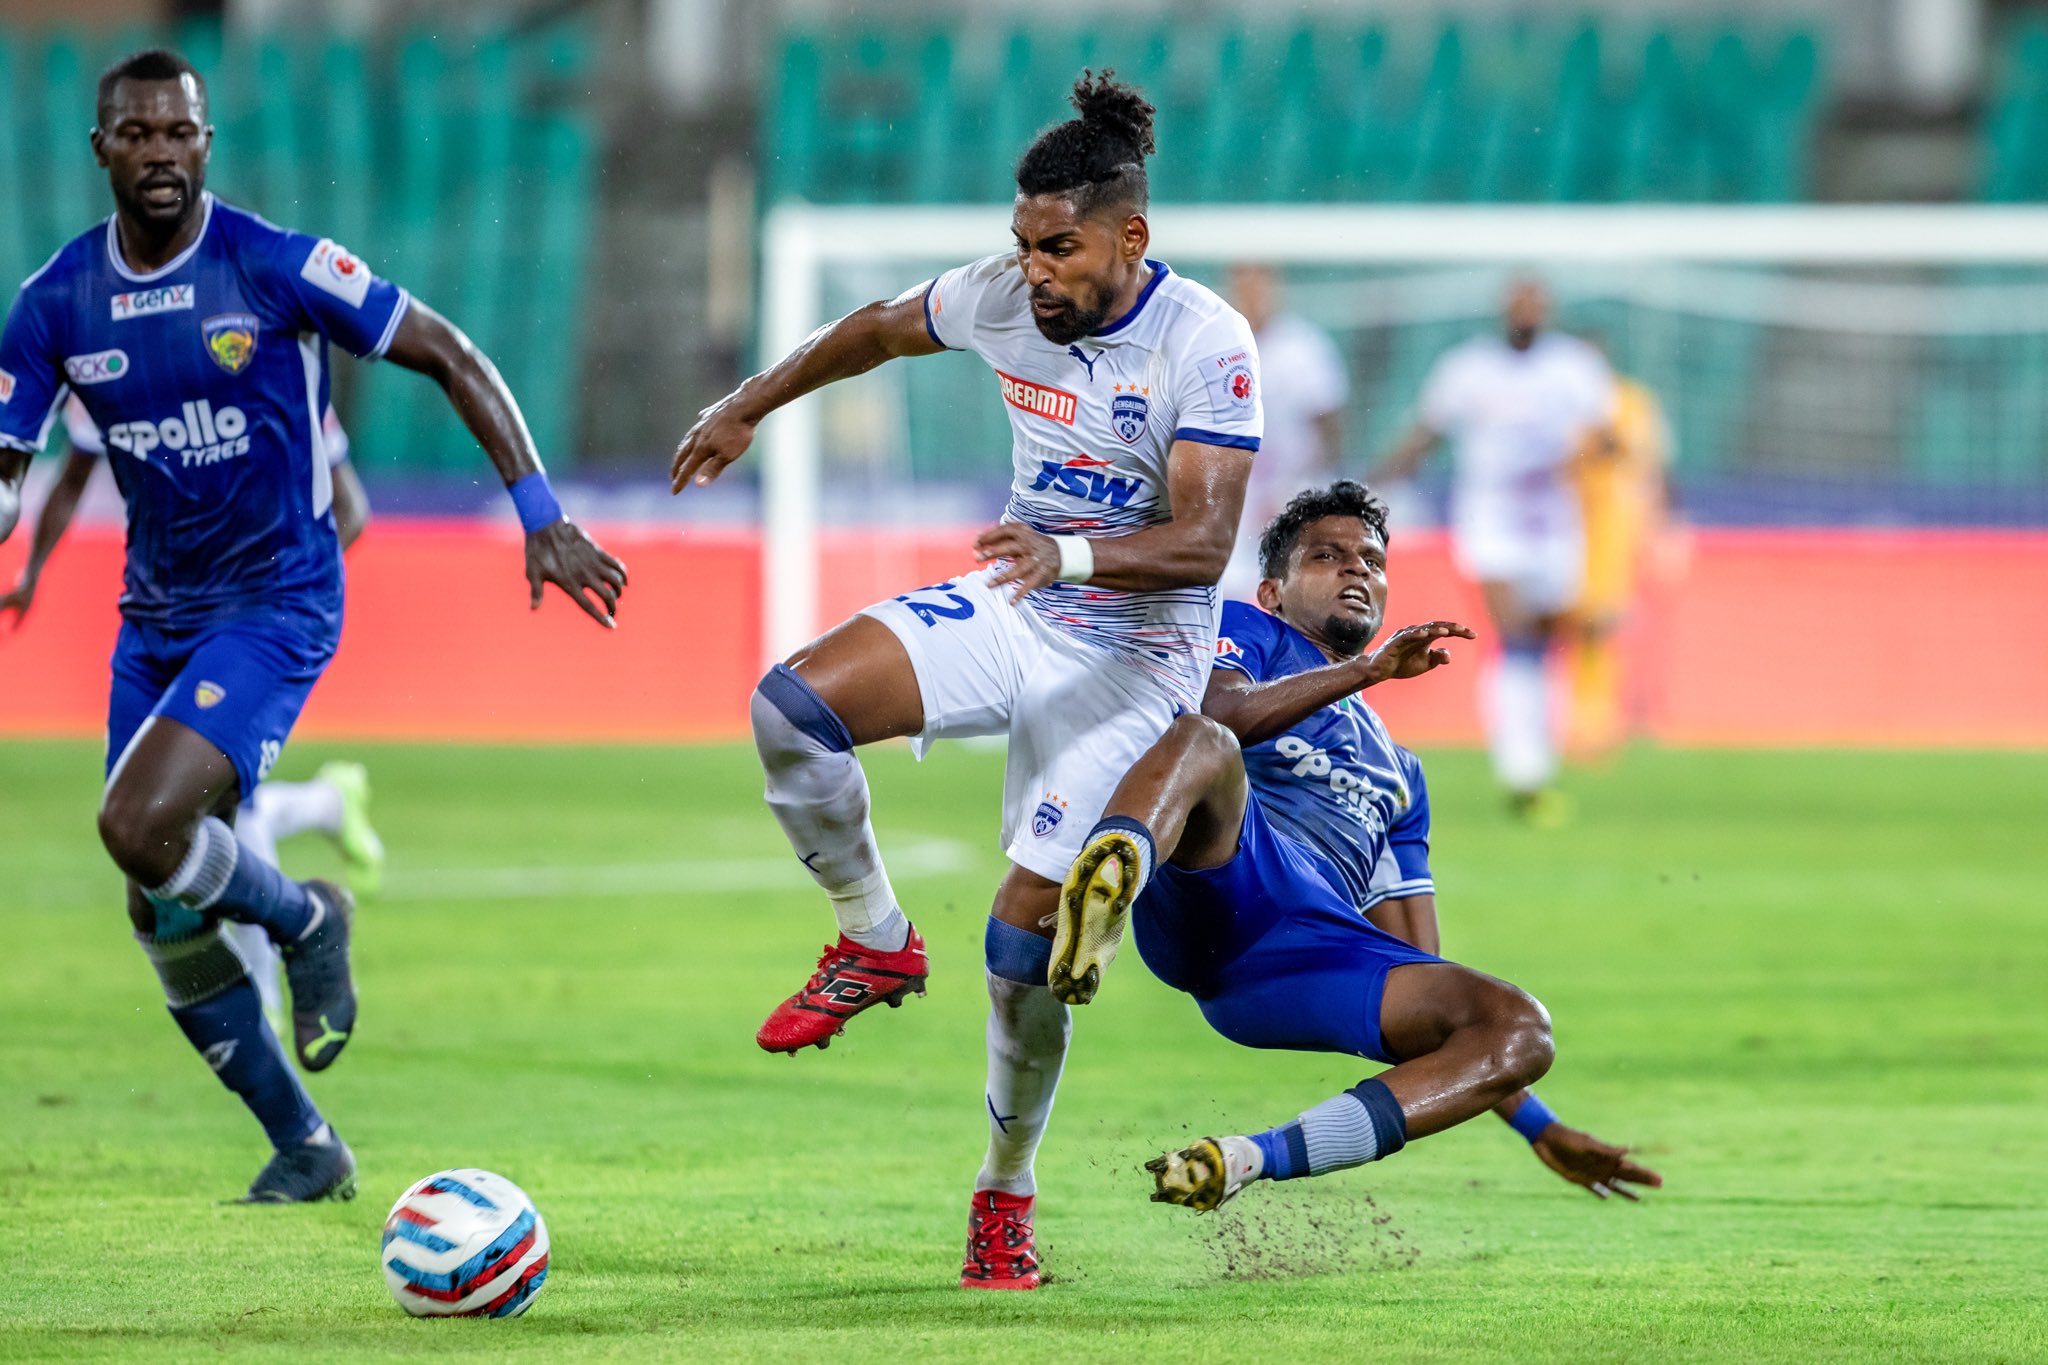 HFC vs BFC LIVE: Hyderabad FC look to regain top spot with win against HIGHLY- strung Bengaluru FC-Check ISL 2022 Preview, Predicted XI, Team News, LIVE STREAMING-Follow LIVE